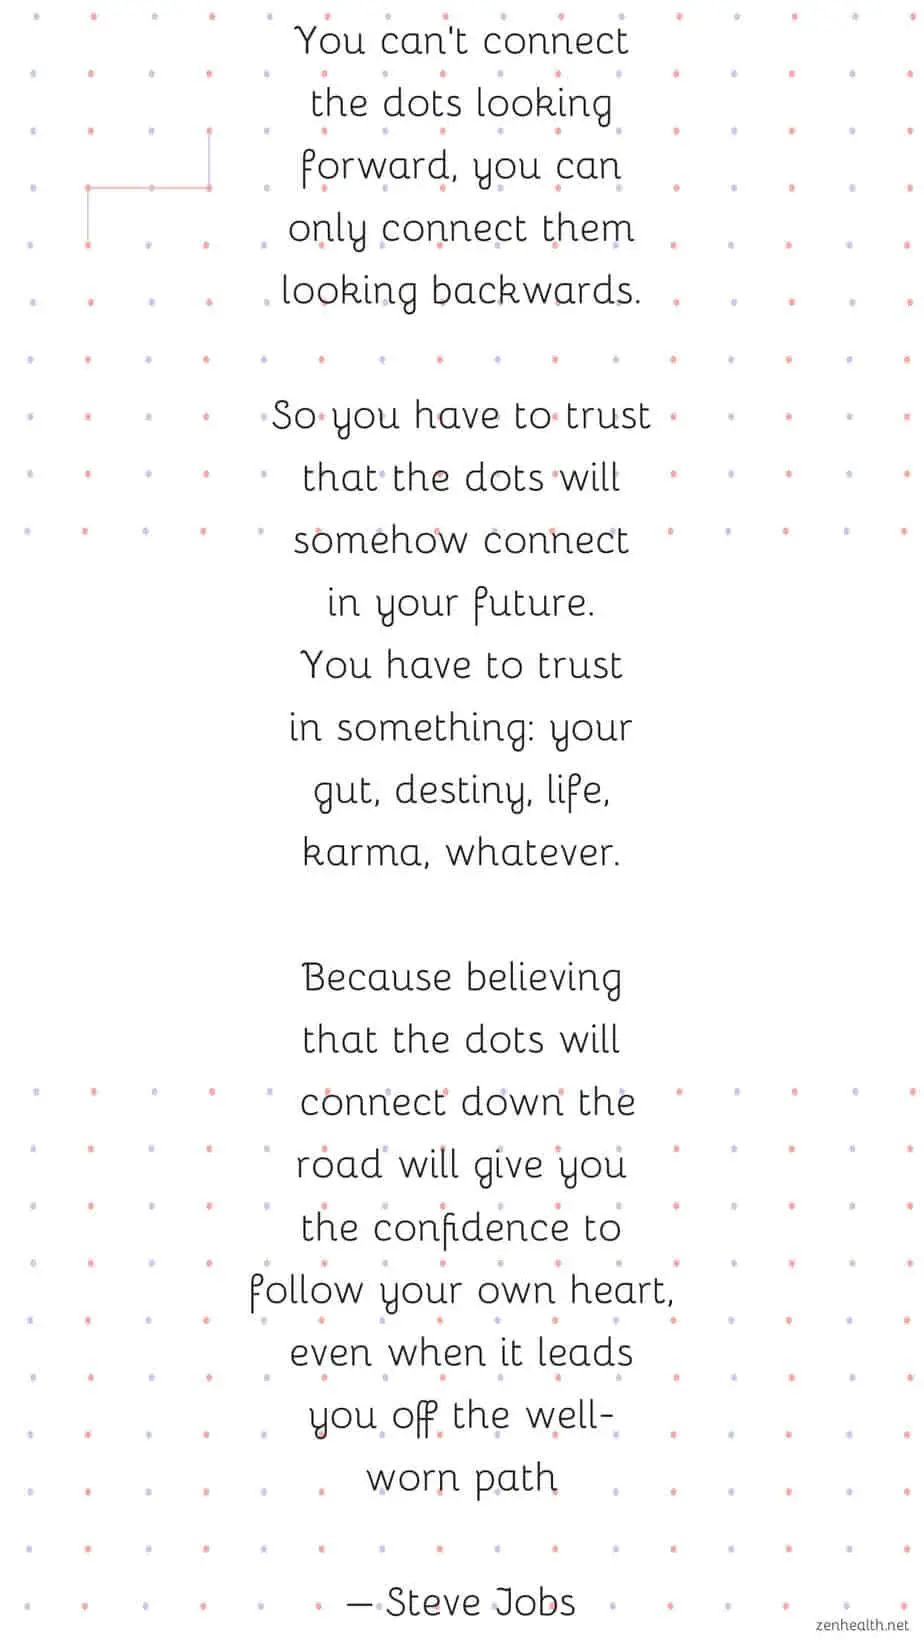 Steve Jobs quote: You can't connect the dots looking forward, you can only connect them looking backwards...